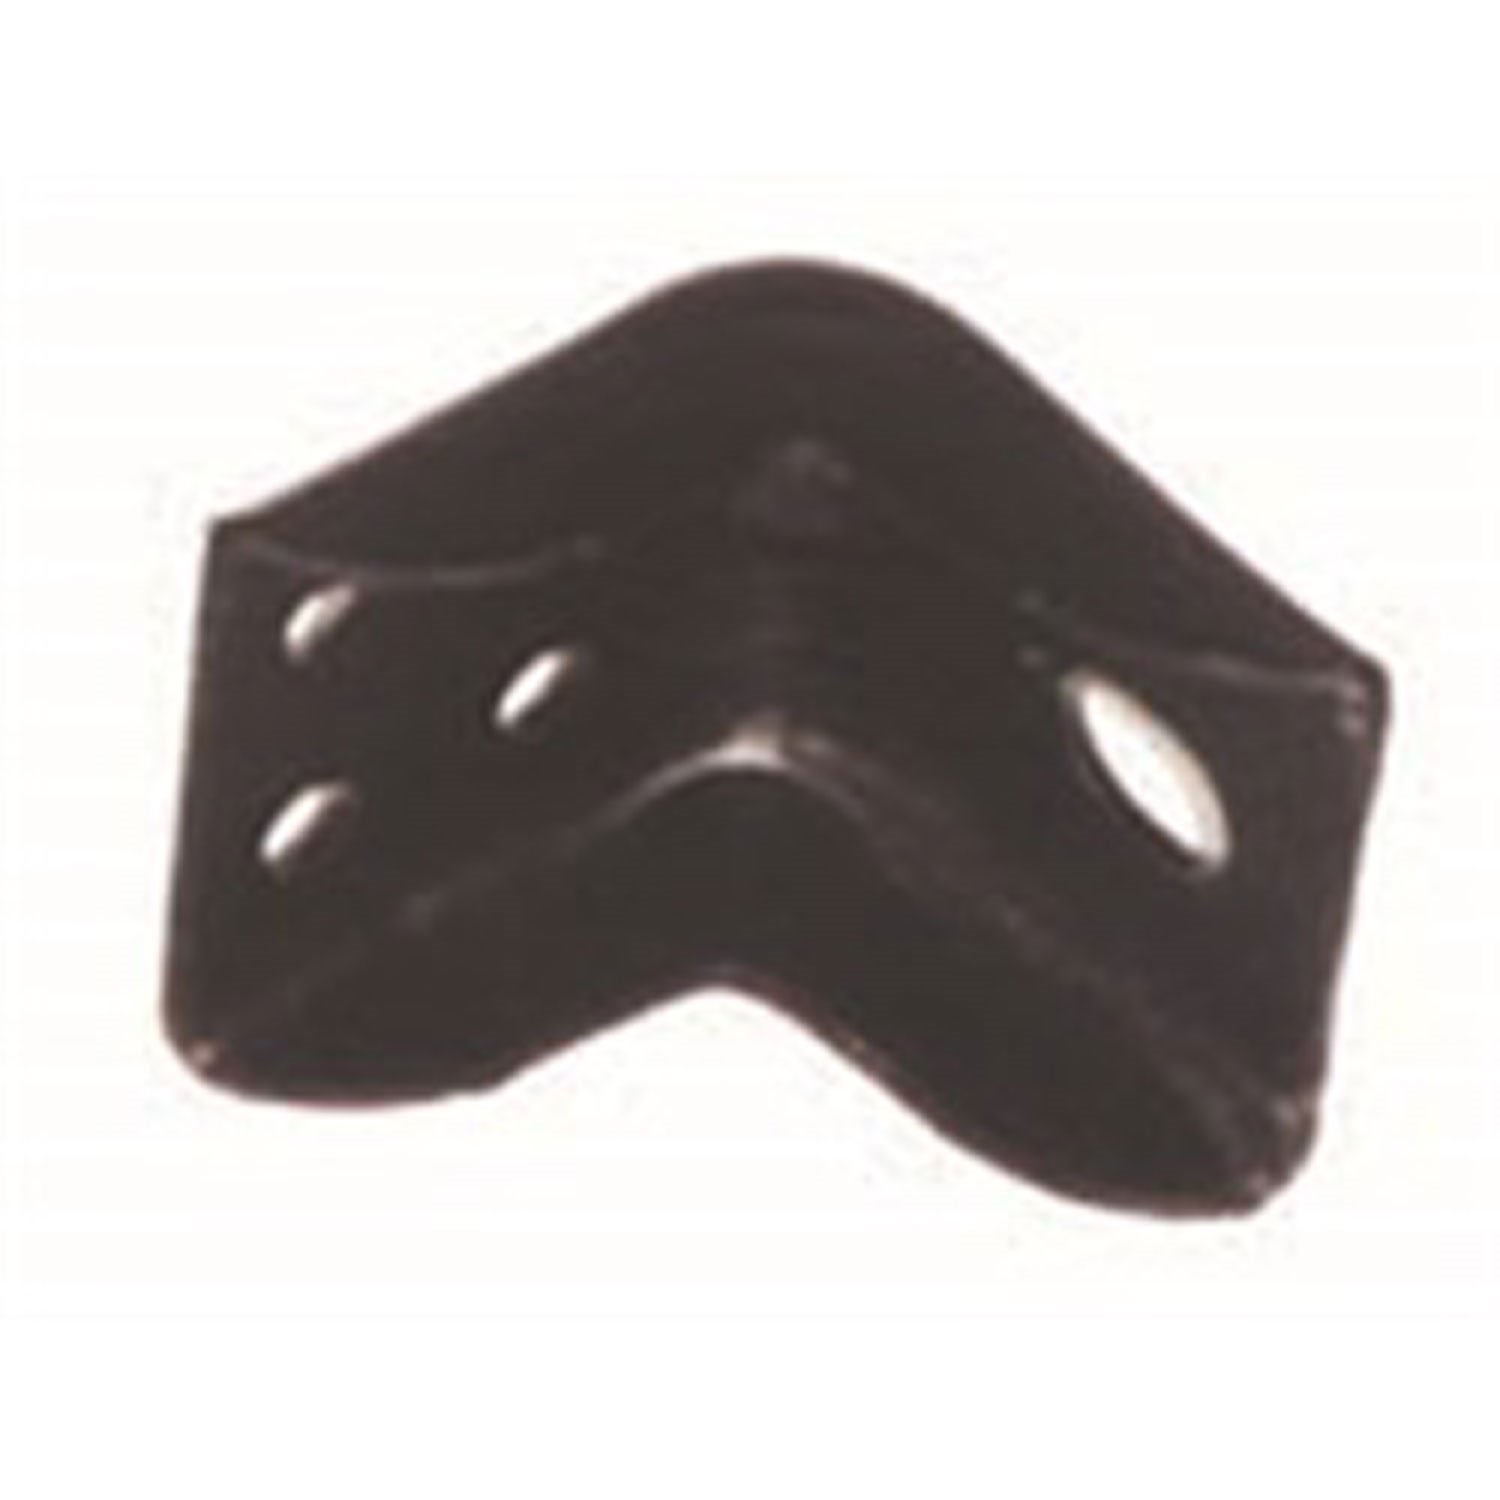 Replacement frame outrigger bracket from Omix-ADA, Fits 41-66 Willys models They can be bolted or welded in place.